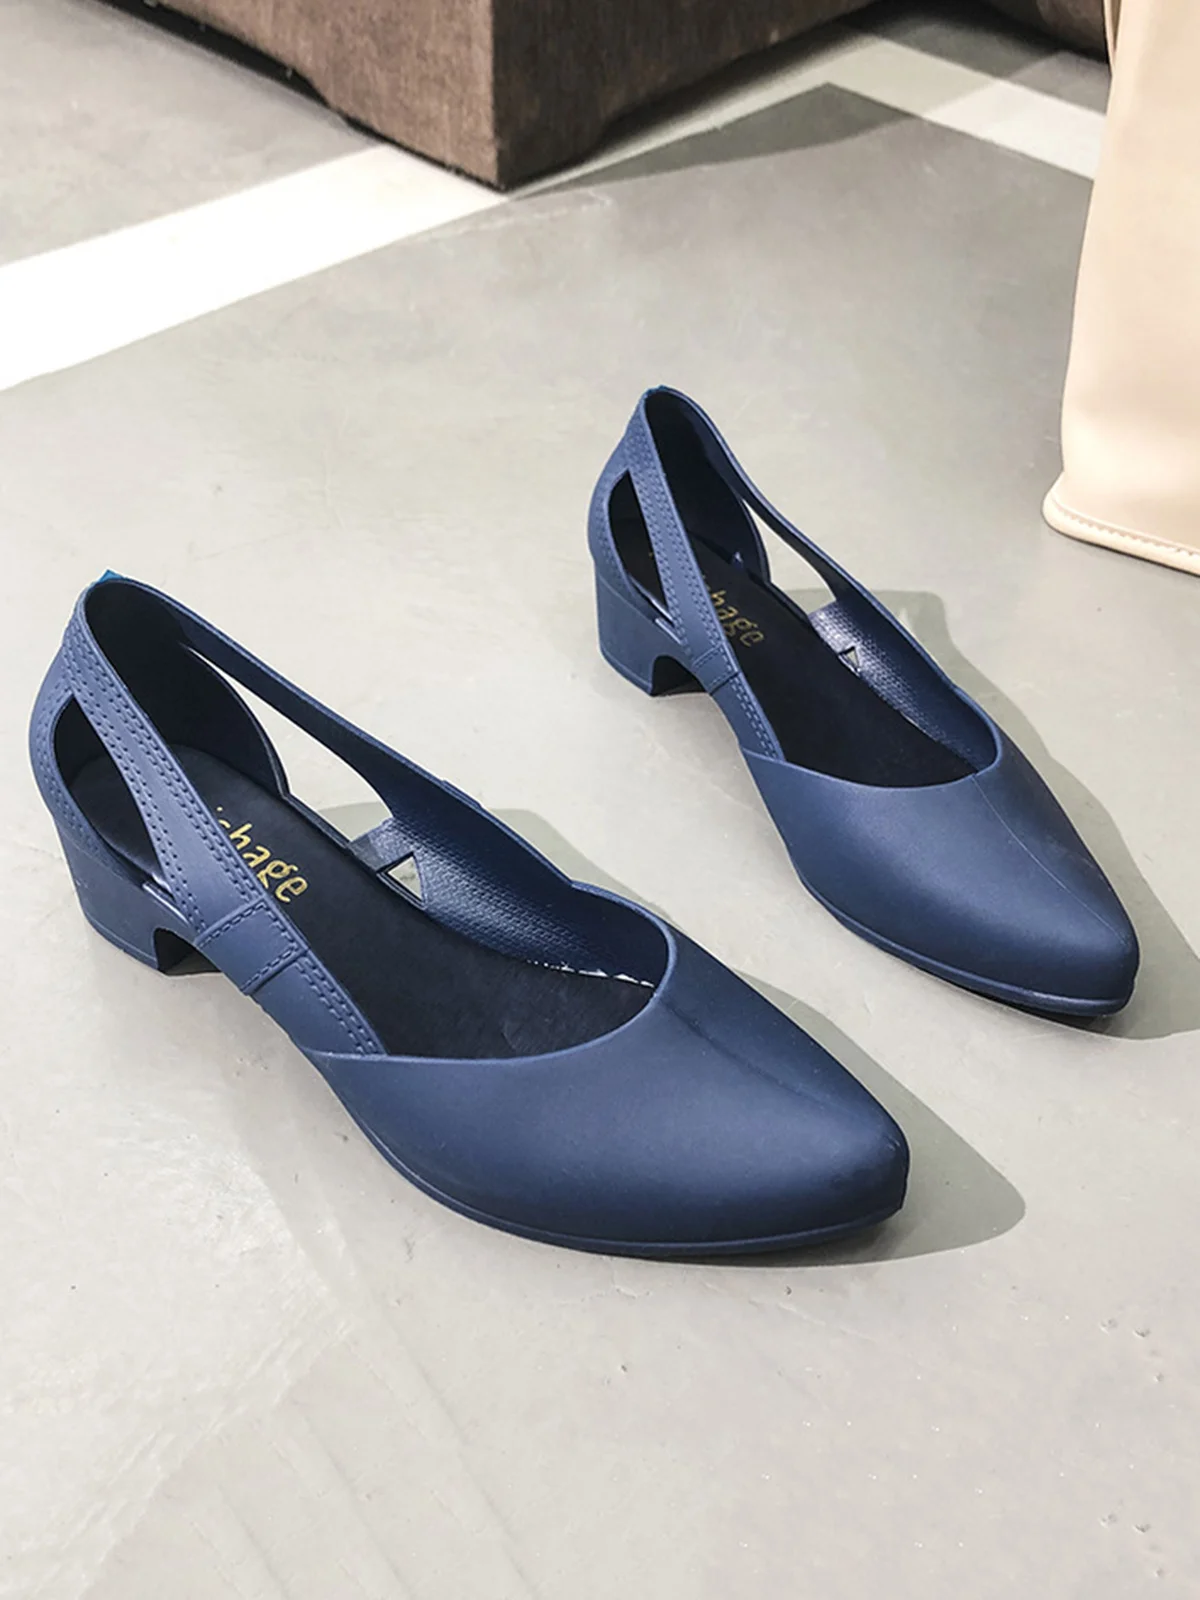 Waterproof Hollow Out Block Heel Beach Shoes | justfashionnow